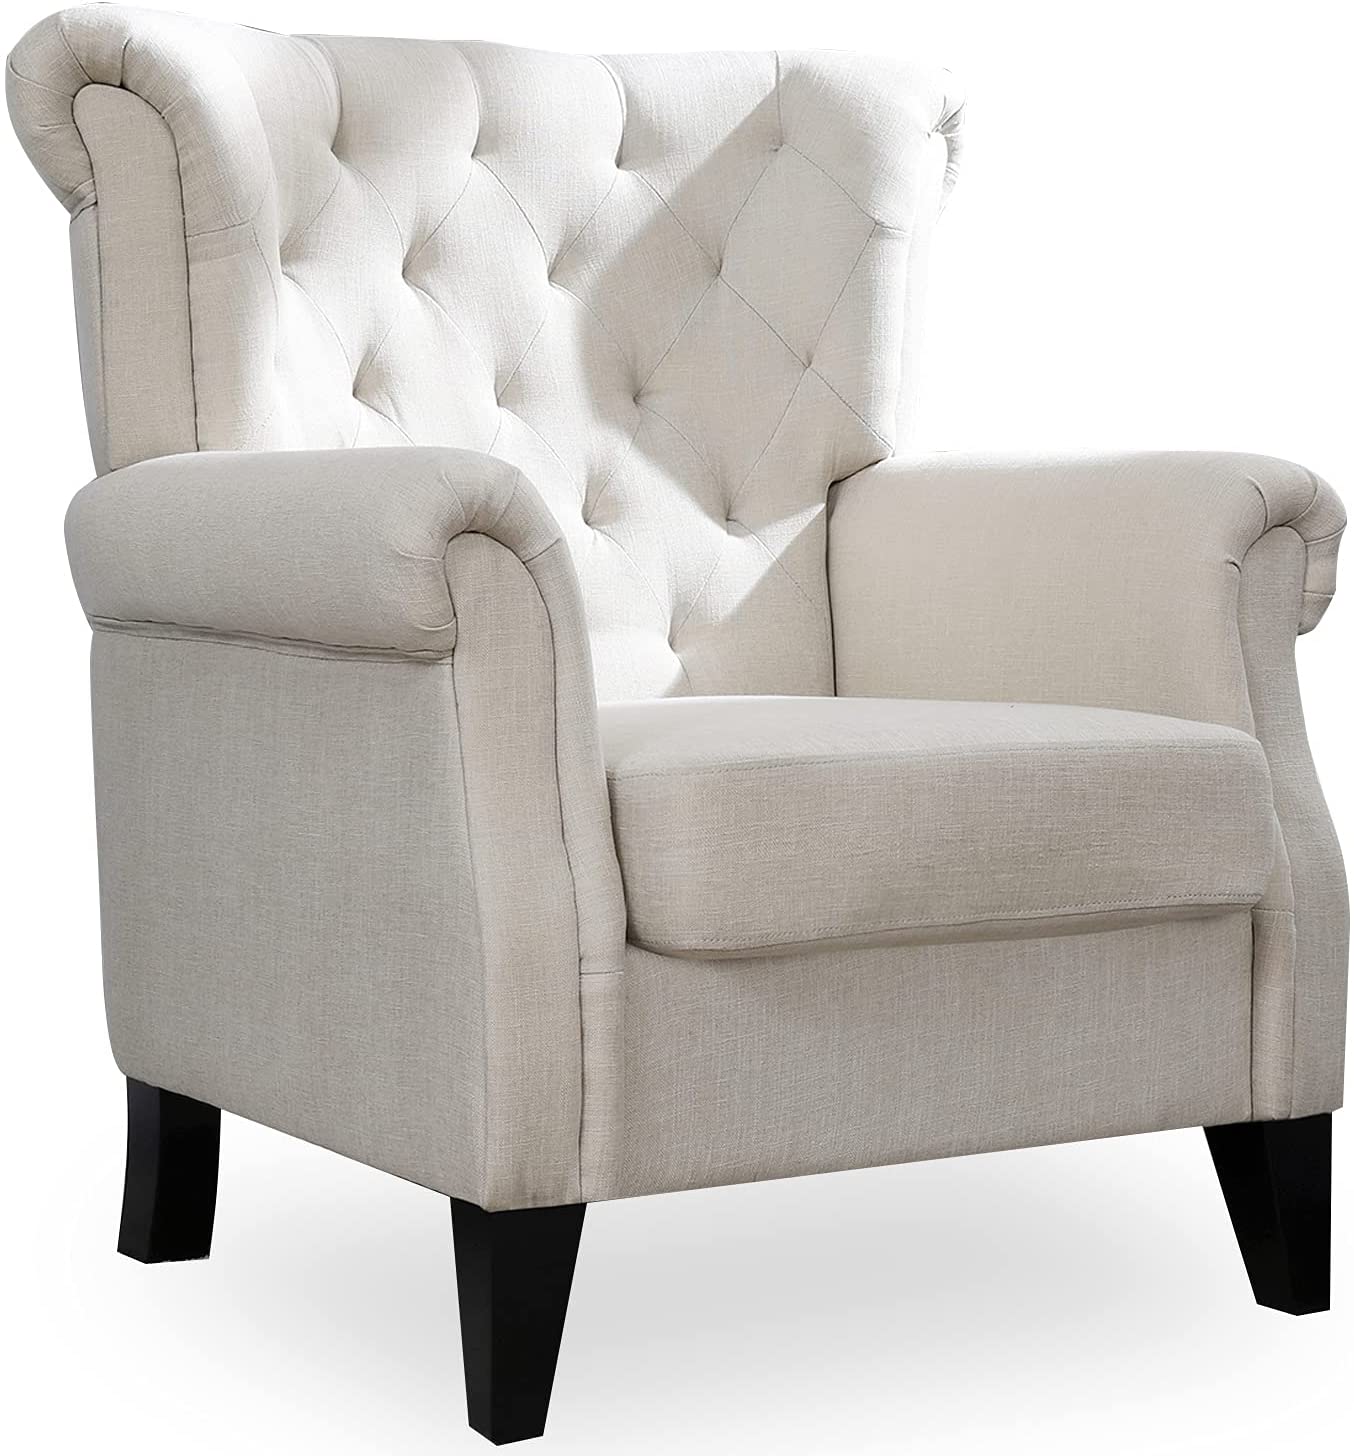 High back armchair for a large living room